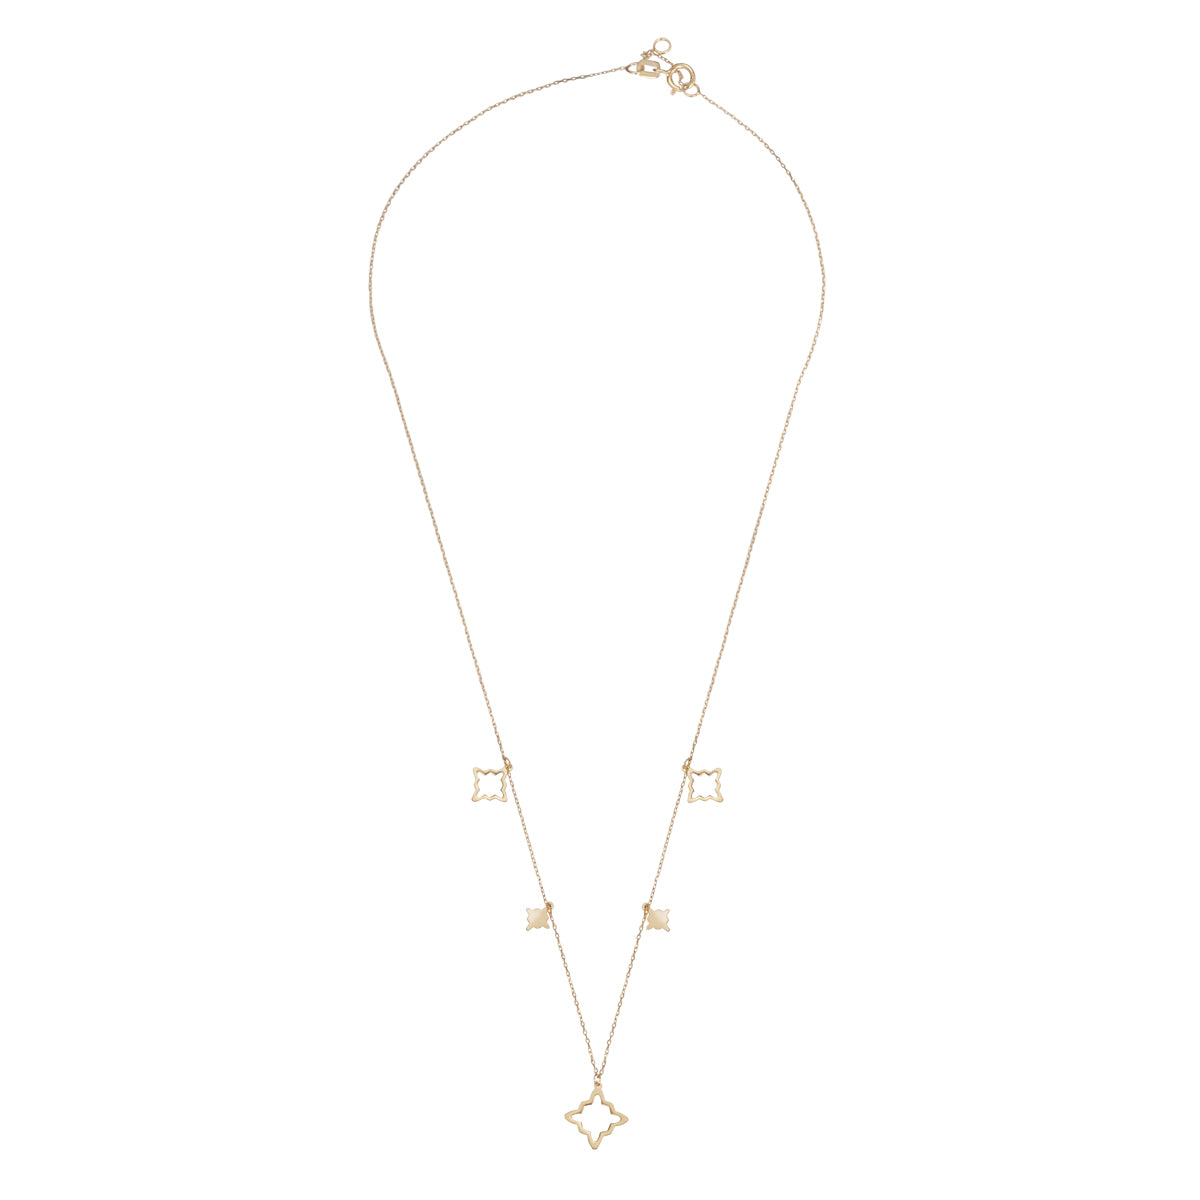 9ct Gold Marrakesh Charm Necklace - John Ross Jewellers